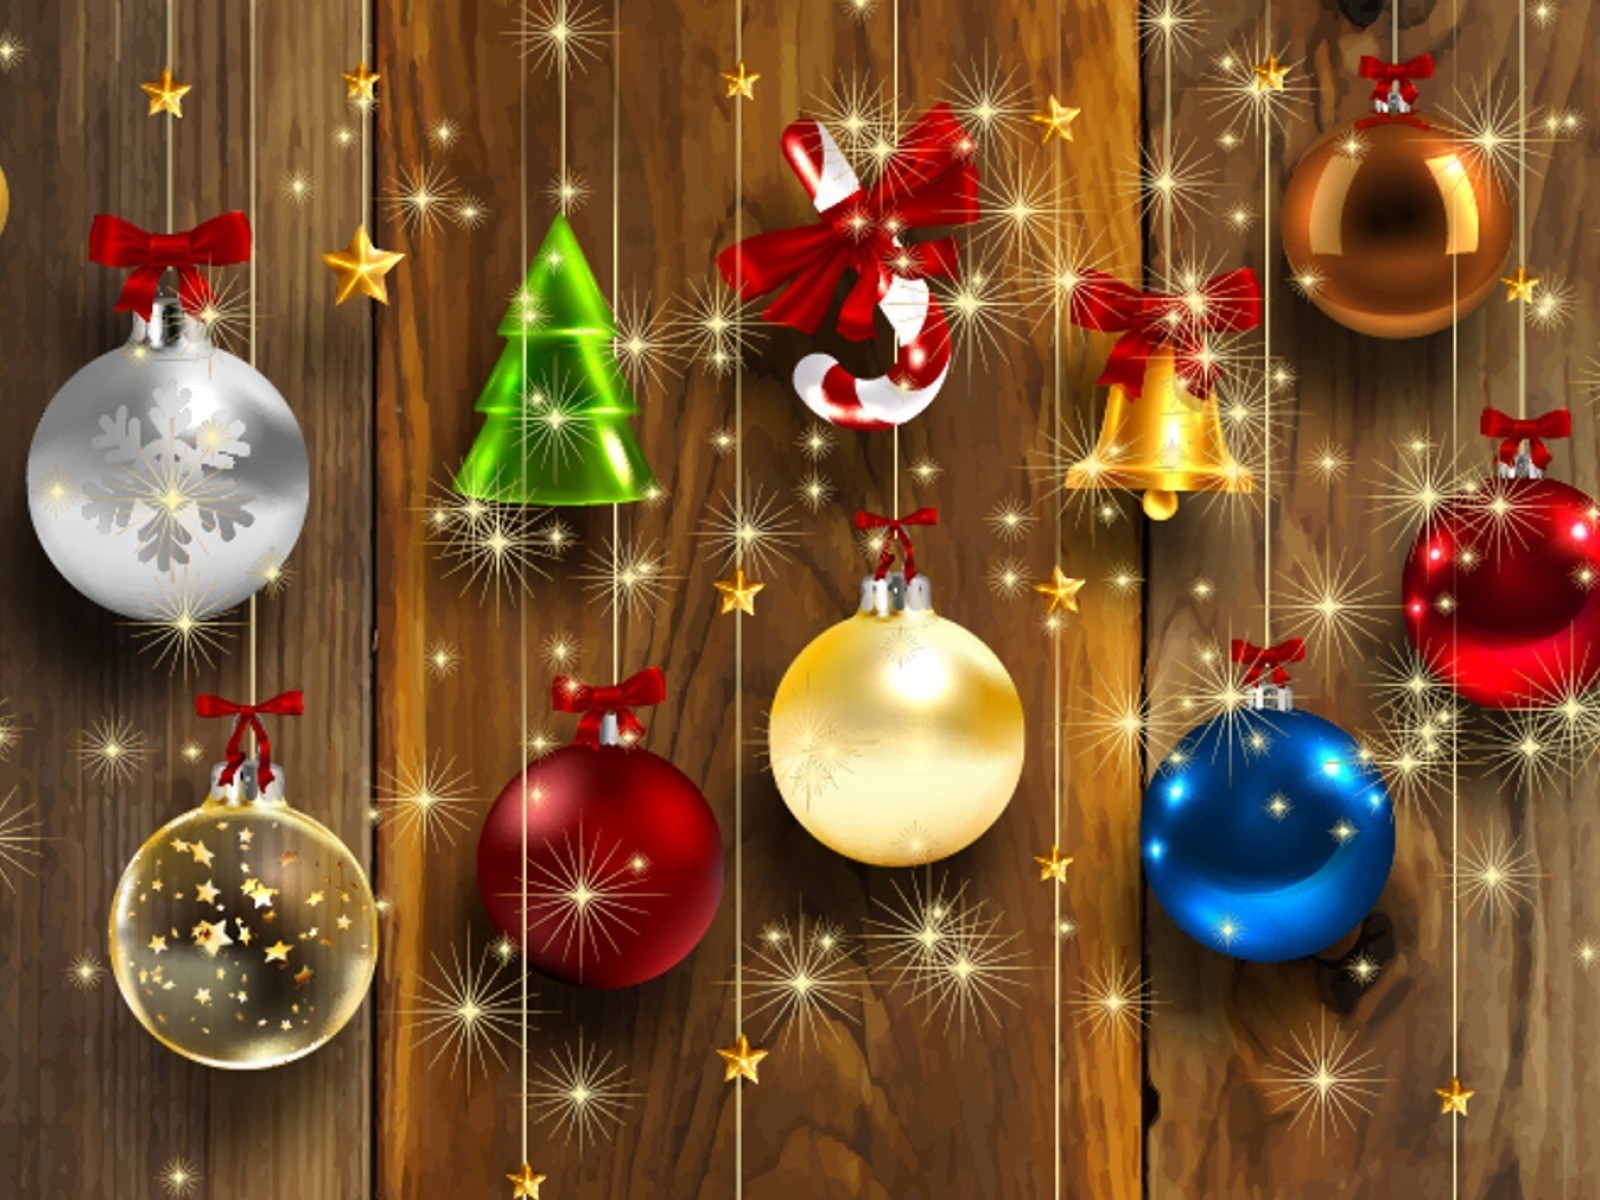 2013 Christmas Ornaments for 1600 x 1200 resolution